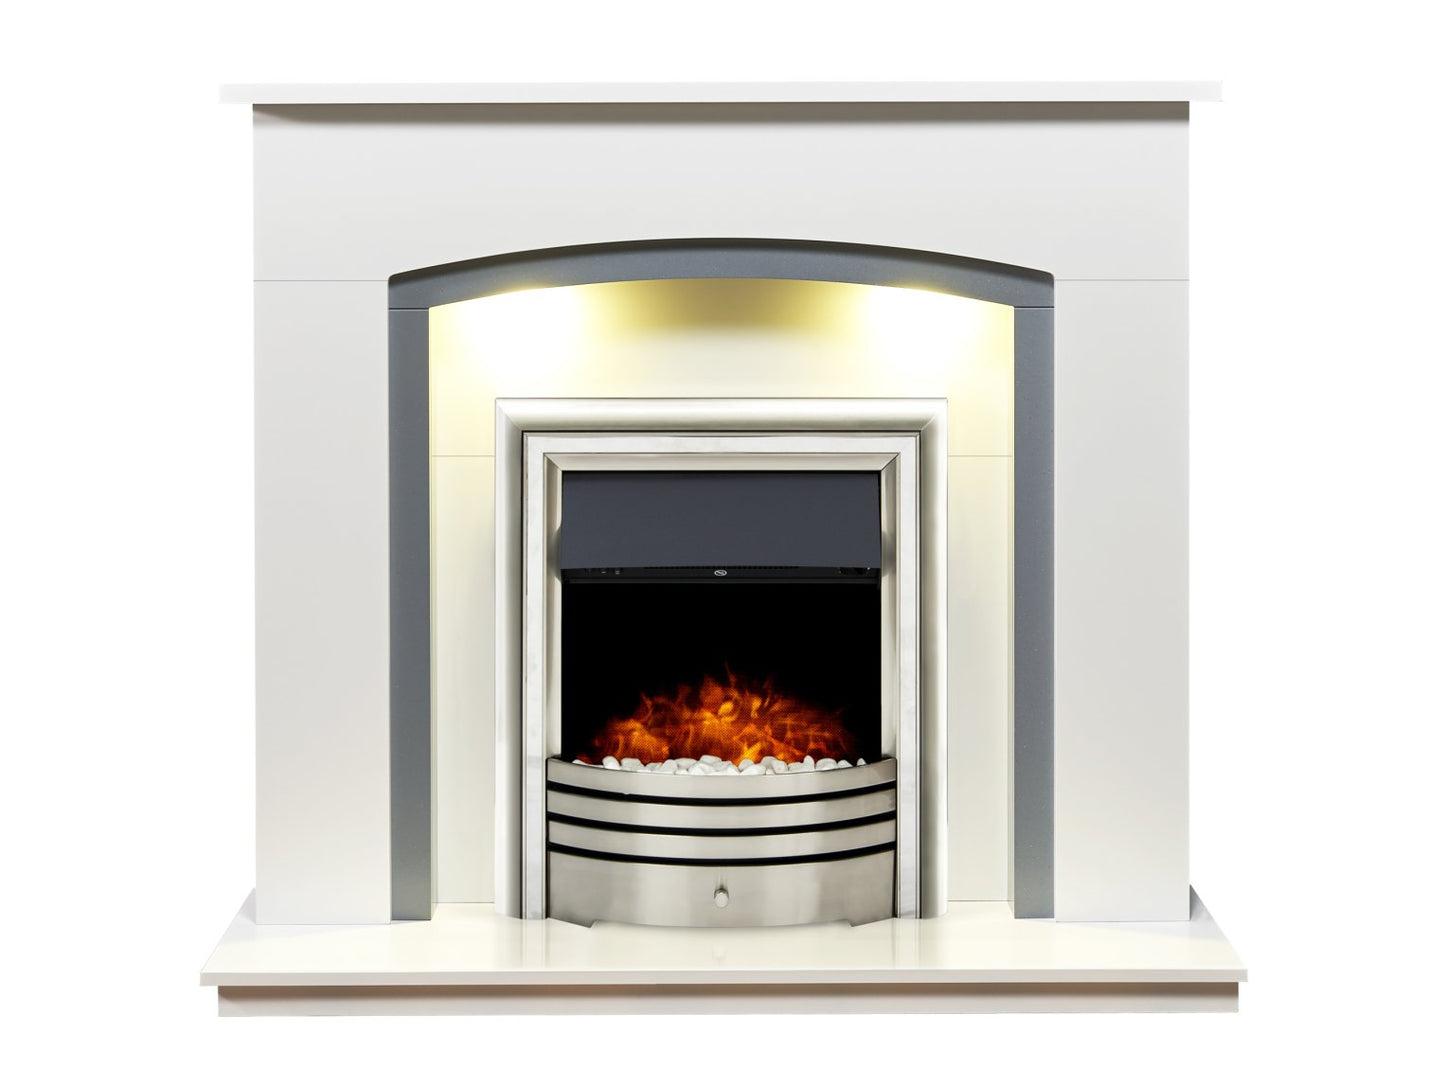 Adam Tuscany Fireplace in Pure White & Grey with Astralis 6-in-1 Electric Fire in Chrome, 48 Inch